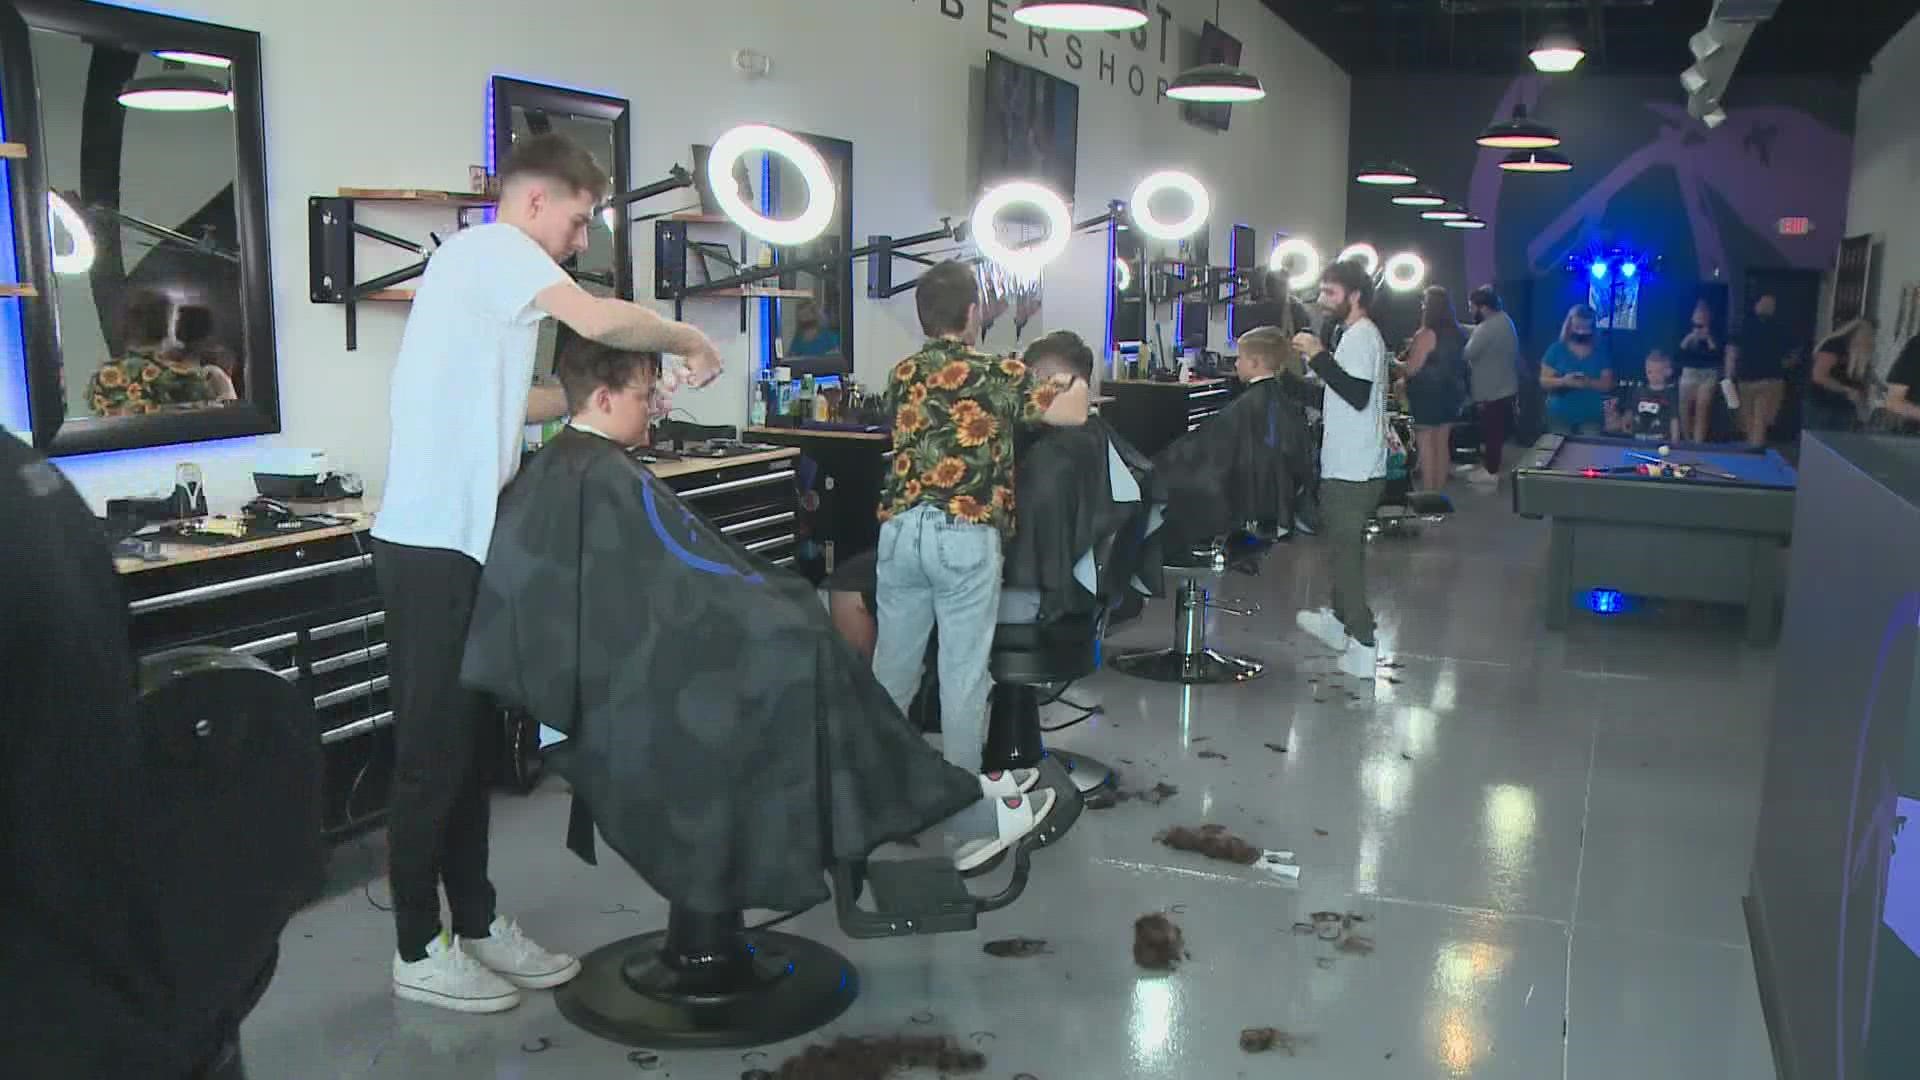 The Crow's Nest Barbershop in Auburn teamed up with Hot Radio Maine and Dirigo Federal Credit Union to put on the "Cuts for Class" event on Monday.